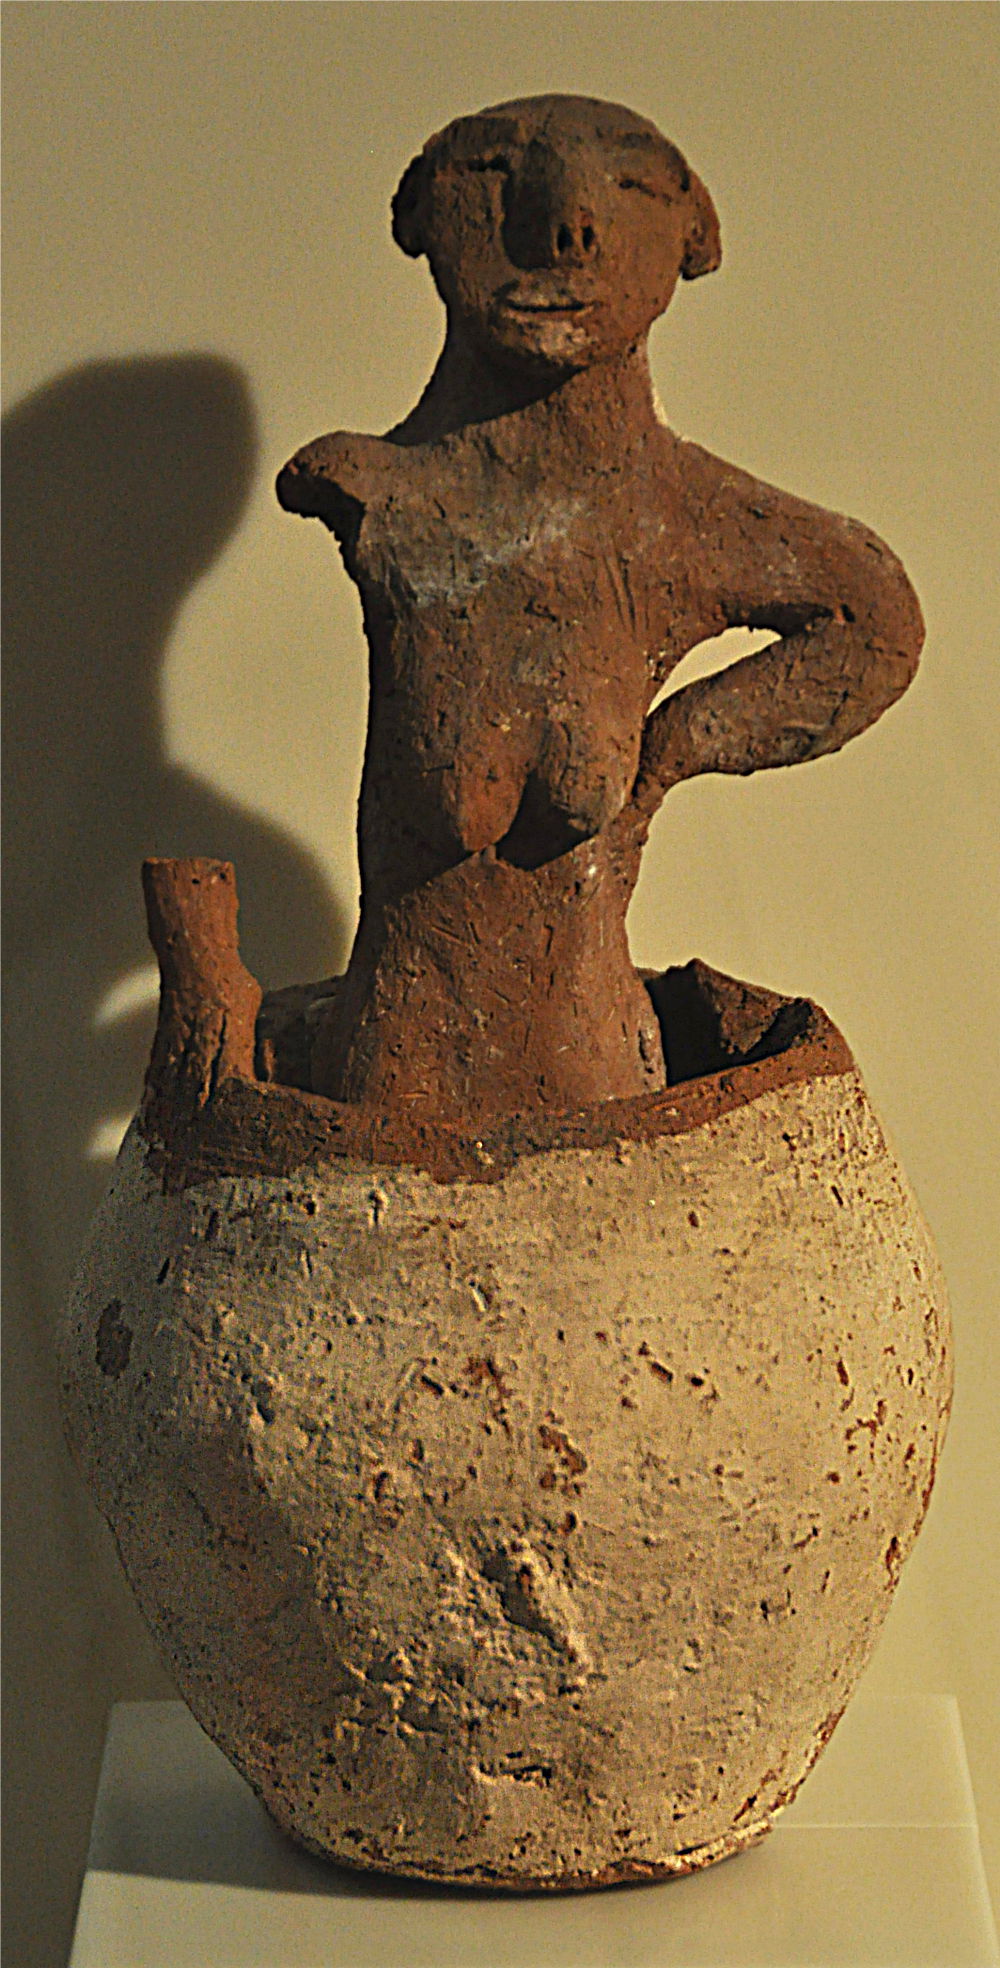 Naqada II, 3700-3200 BC, Statuette of a woman brewing beer. Berlin, Neues Museum